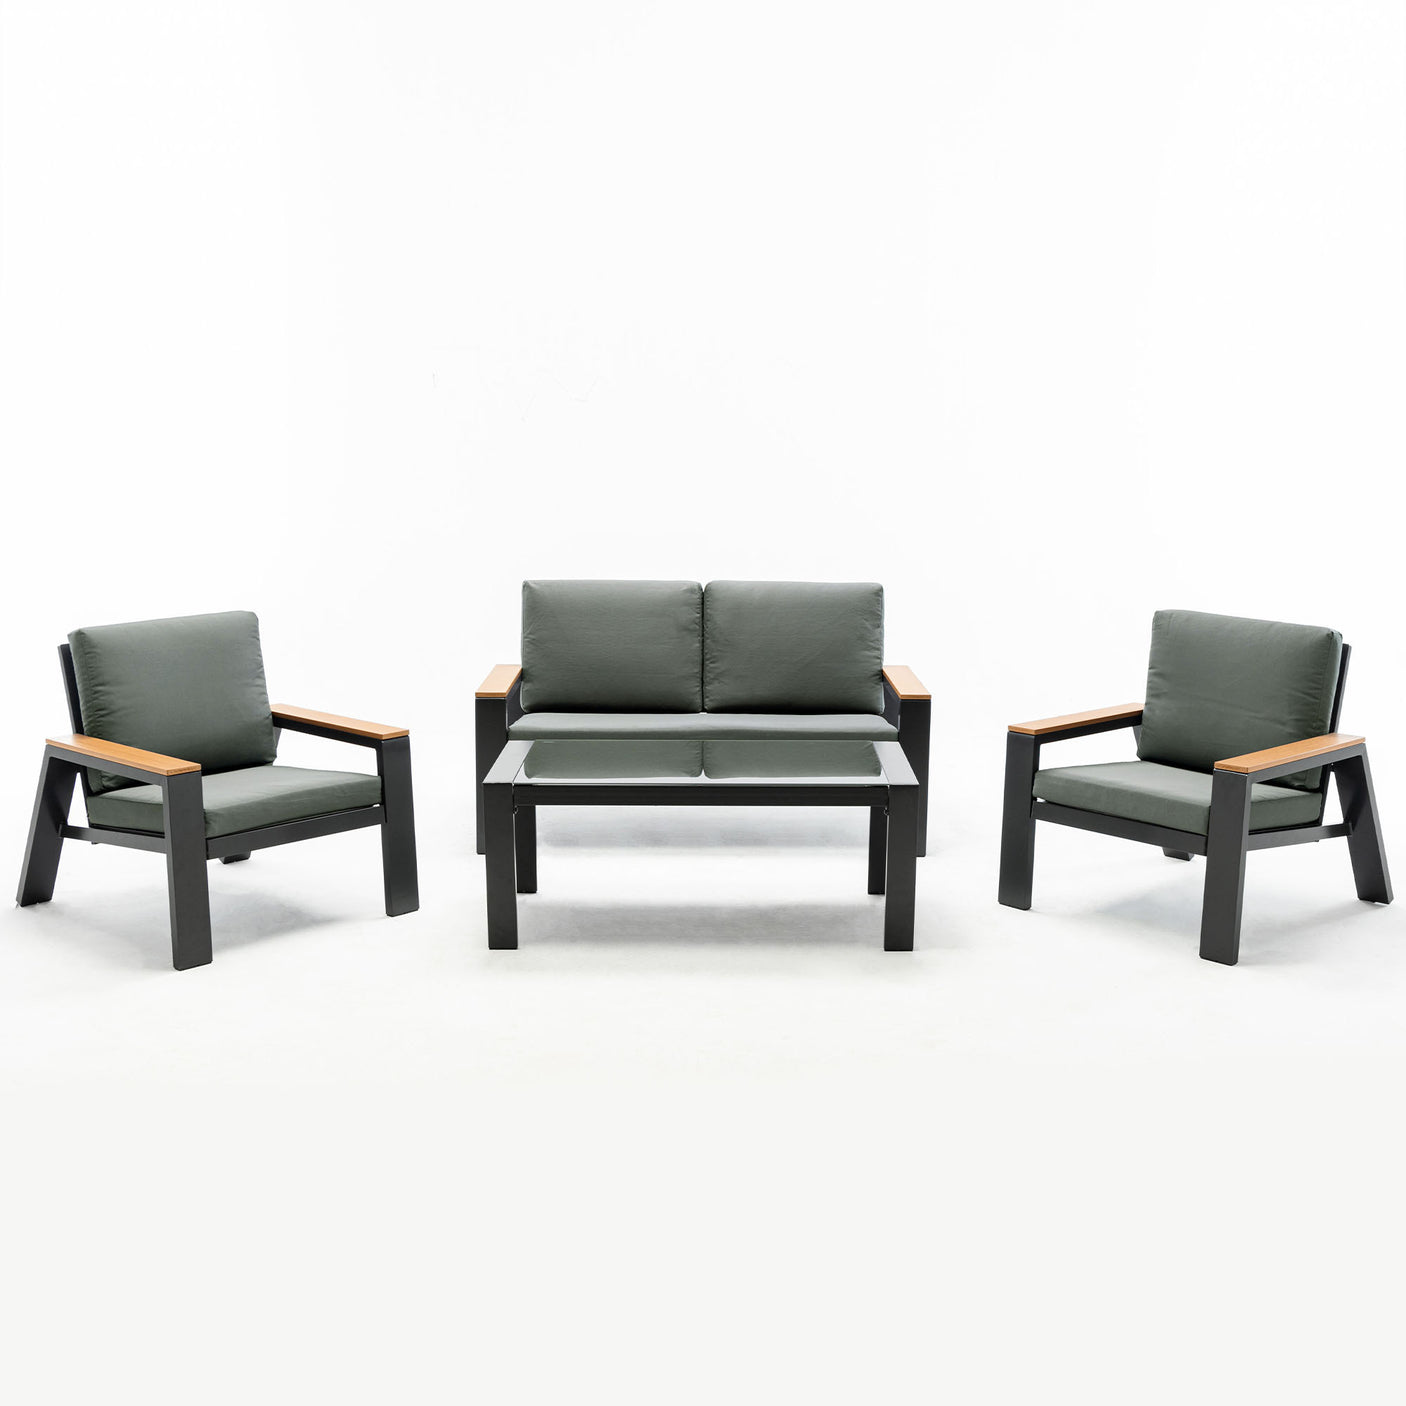 Metal 4 - Person Seating Group with Cushions